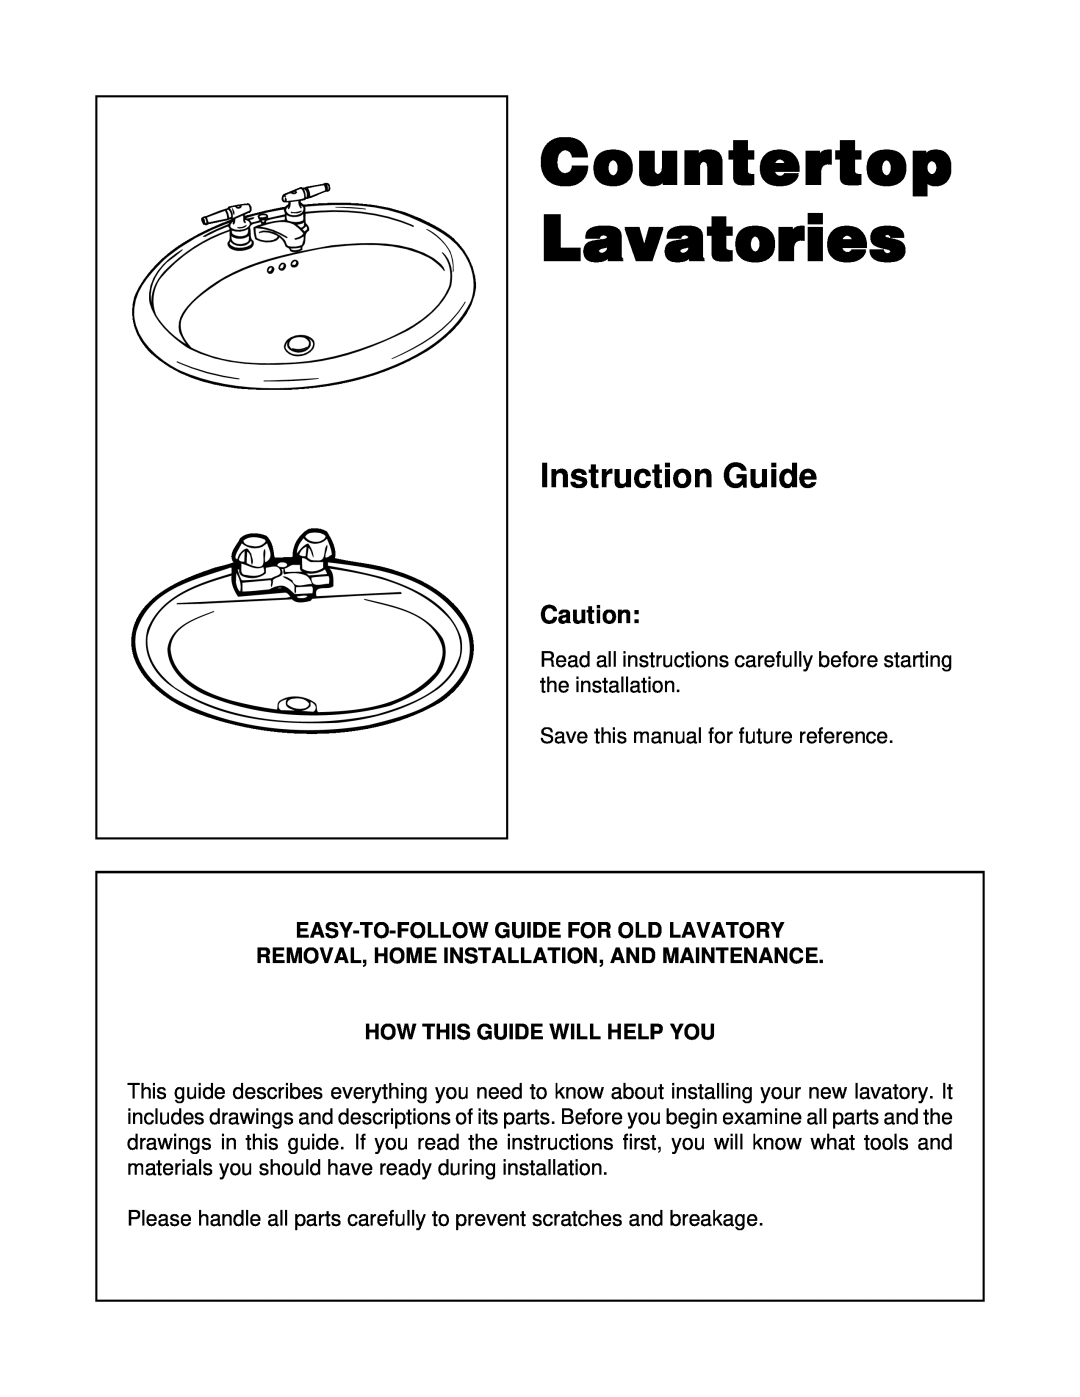 Jacuzzi Countertop Lavatories manual Instruction Guide, Easy-To-Followguide For Old Lavatory, How This Guide Will Help You 